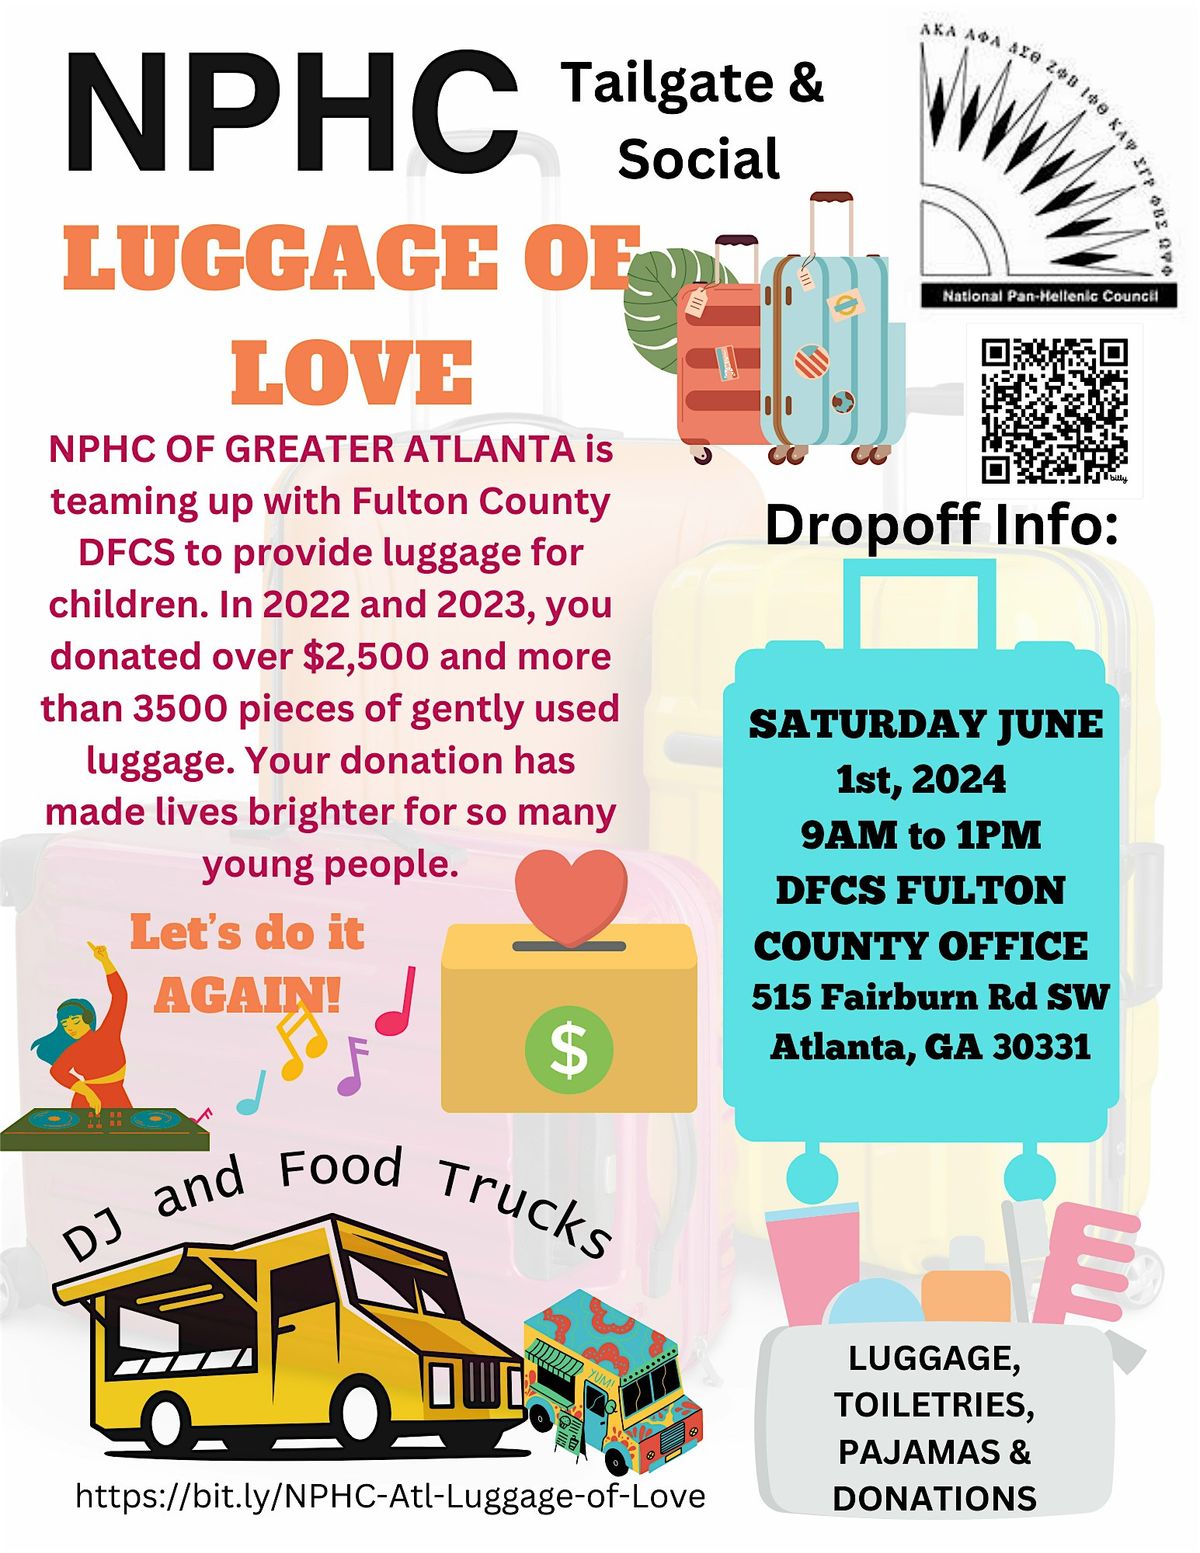 National Pan-Hellenic Council Luggage of Love